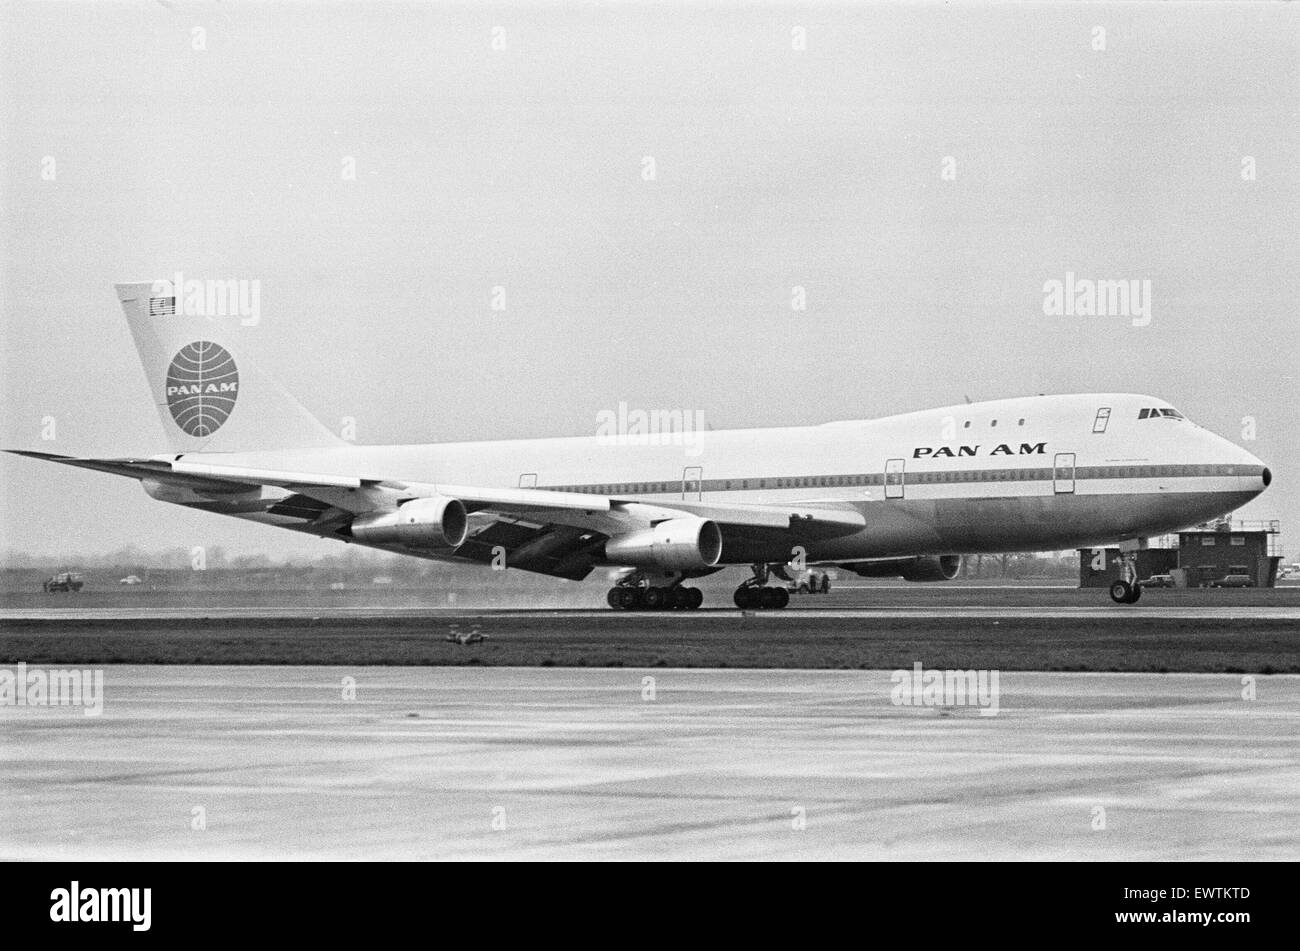 The arrival of the first Boeing 747 'Jumbo Jet' at Heathrow Airport. The aircraft had been delayed for three hours in New York where one of the fan jet engines had been giving trouble and had to be replaced. The aircraft carried over 300 employees of the Stock Photo